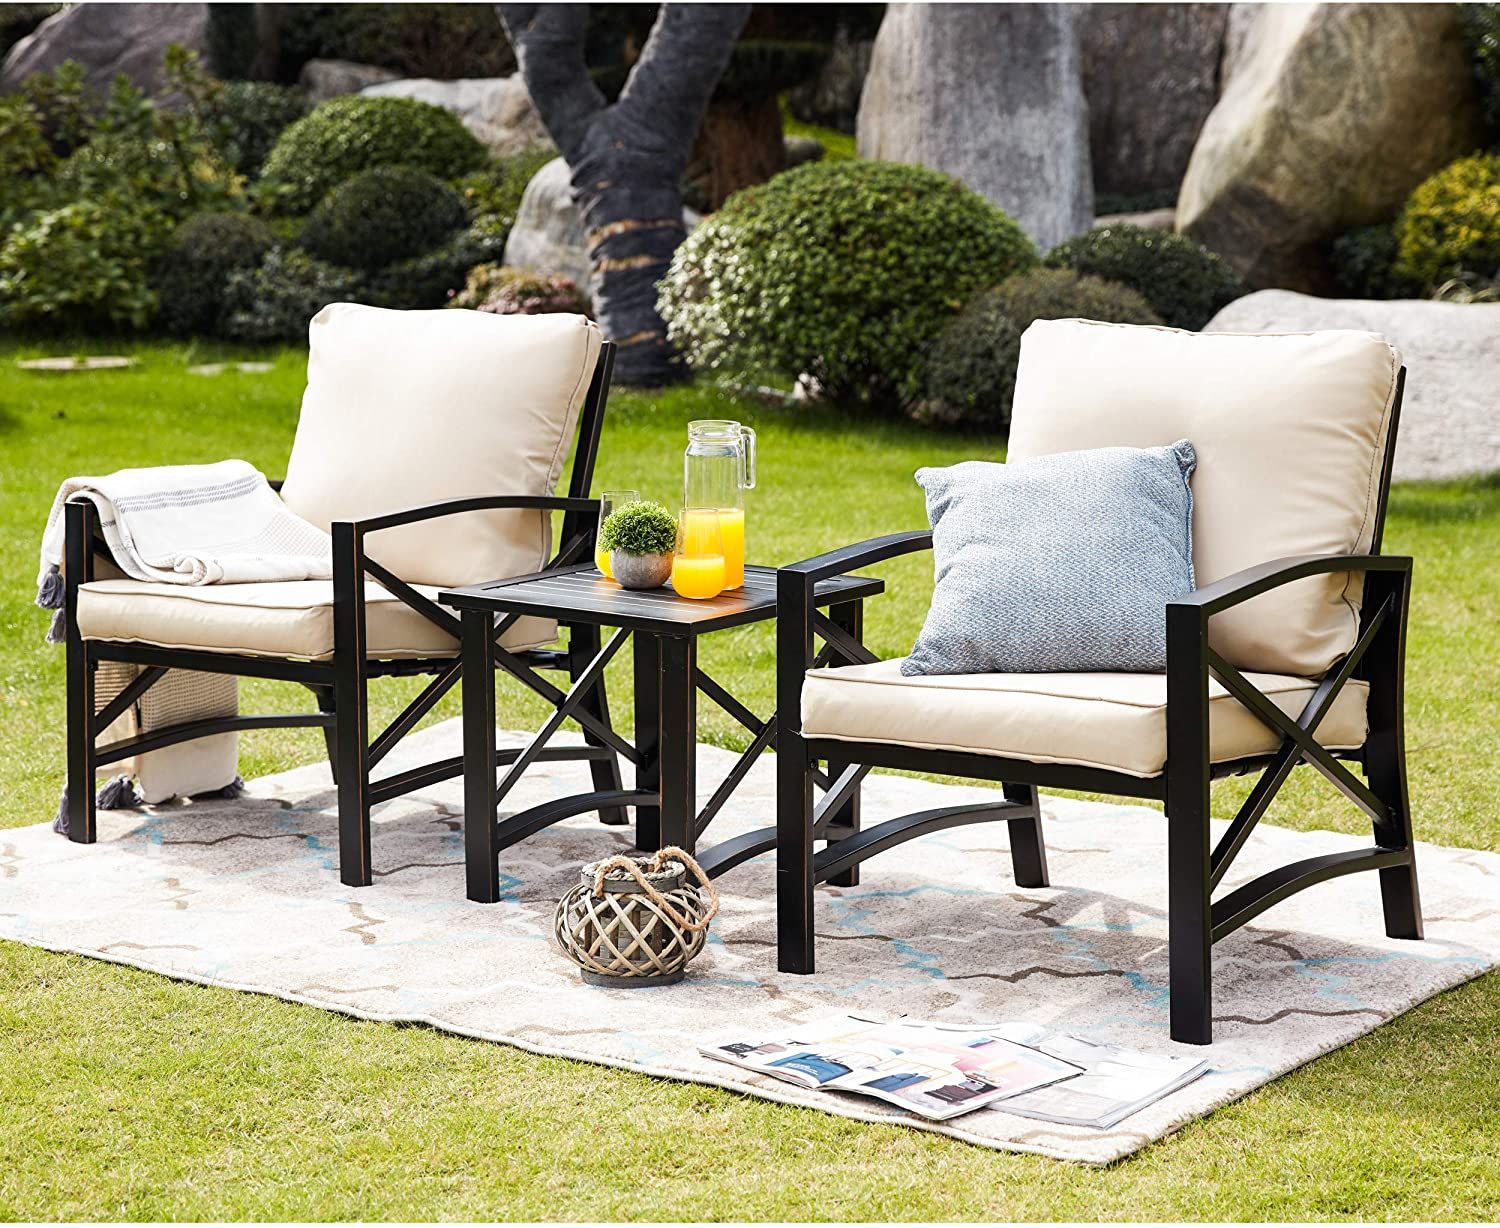 8 Best Patio Furniture Sets 2021 The Strategist - Top Rated Patio Furniture 2021